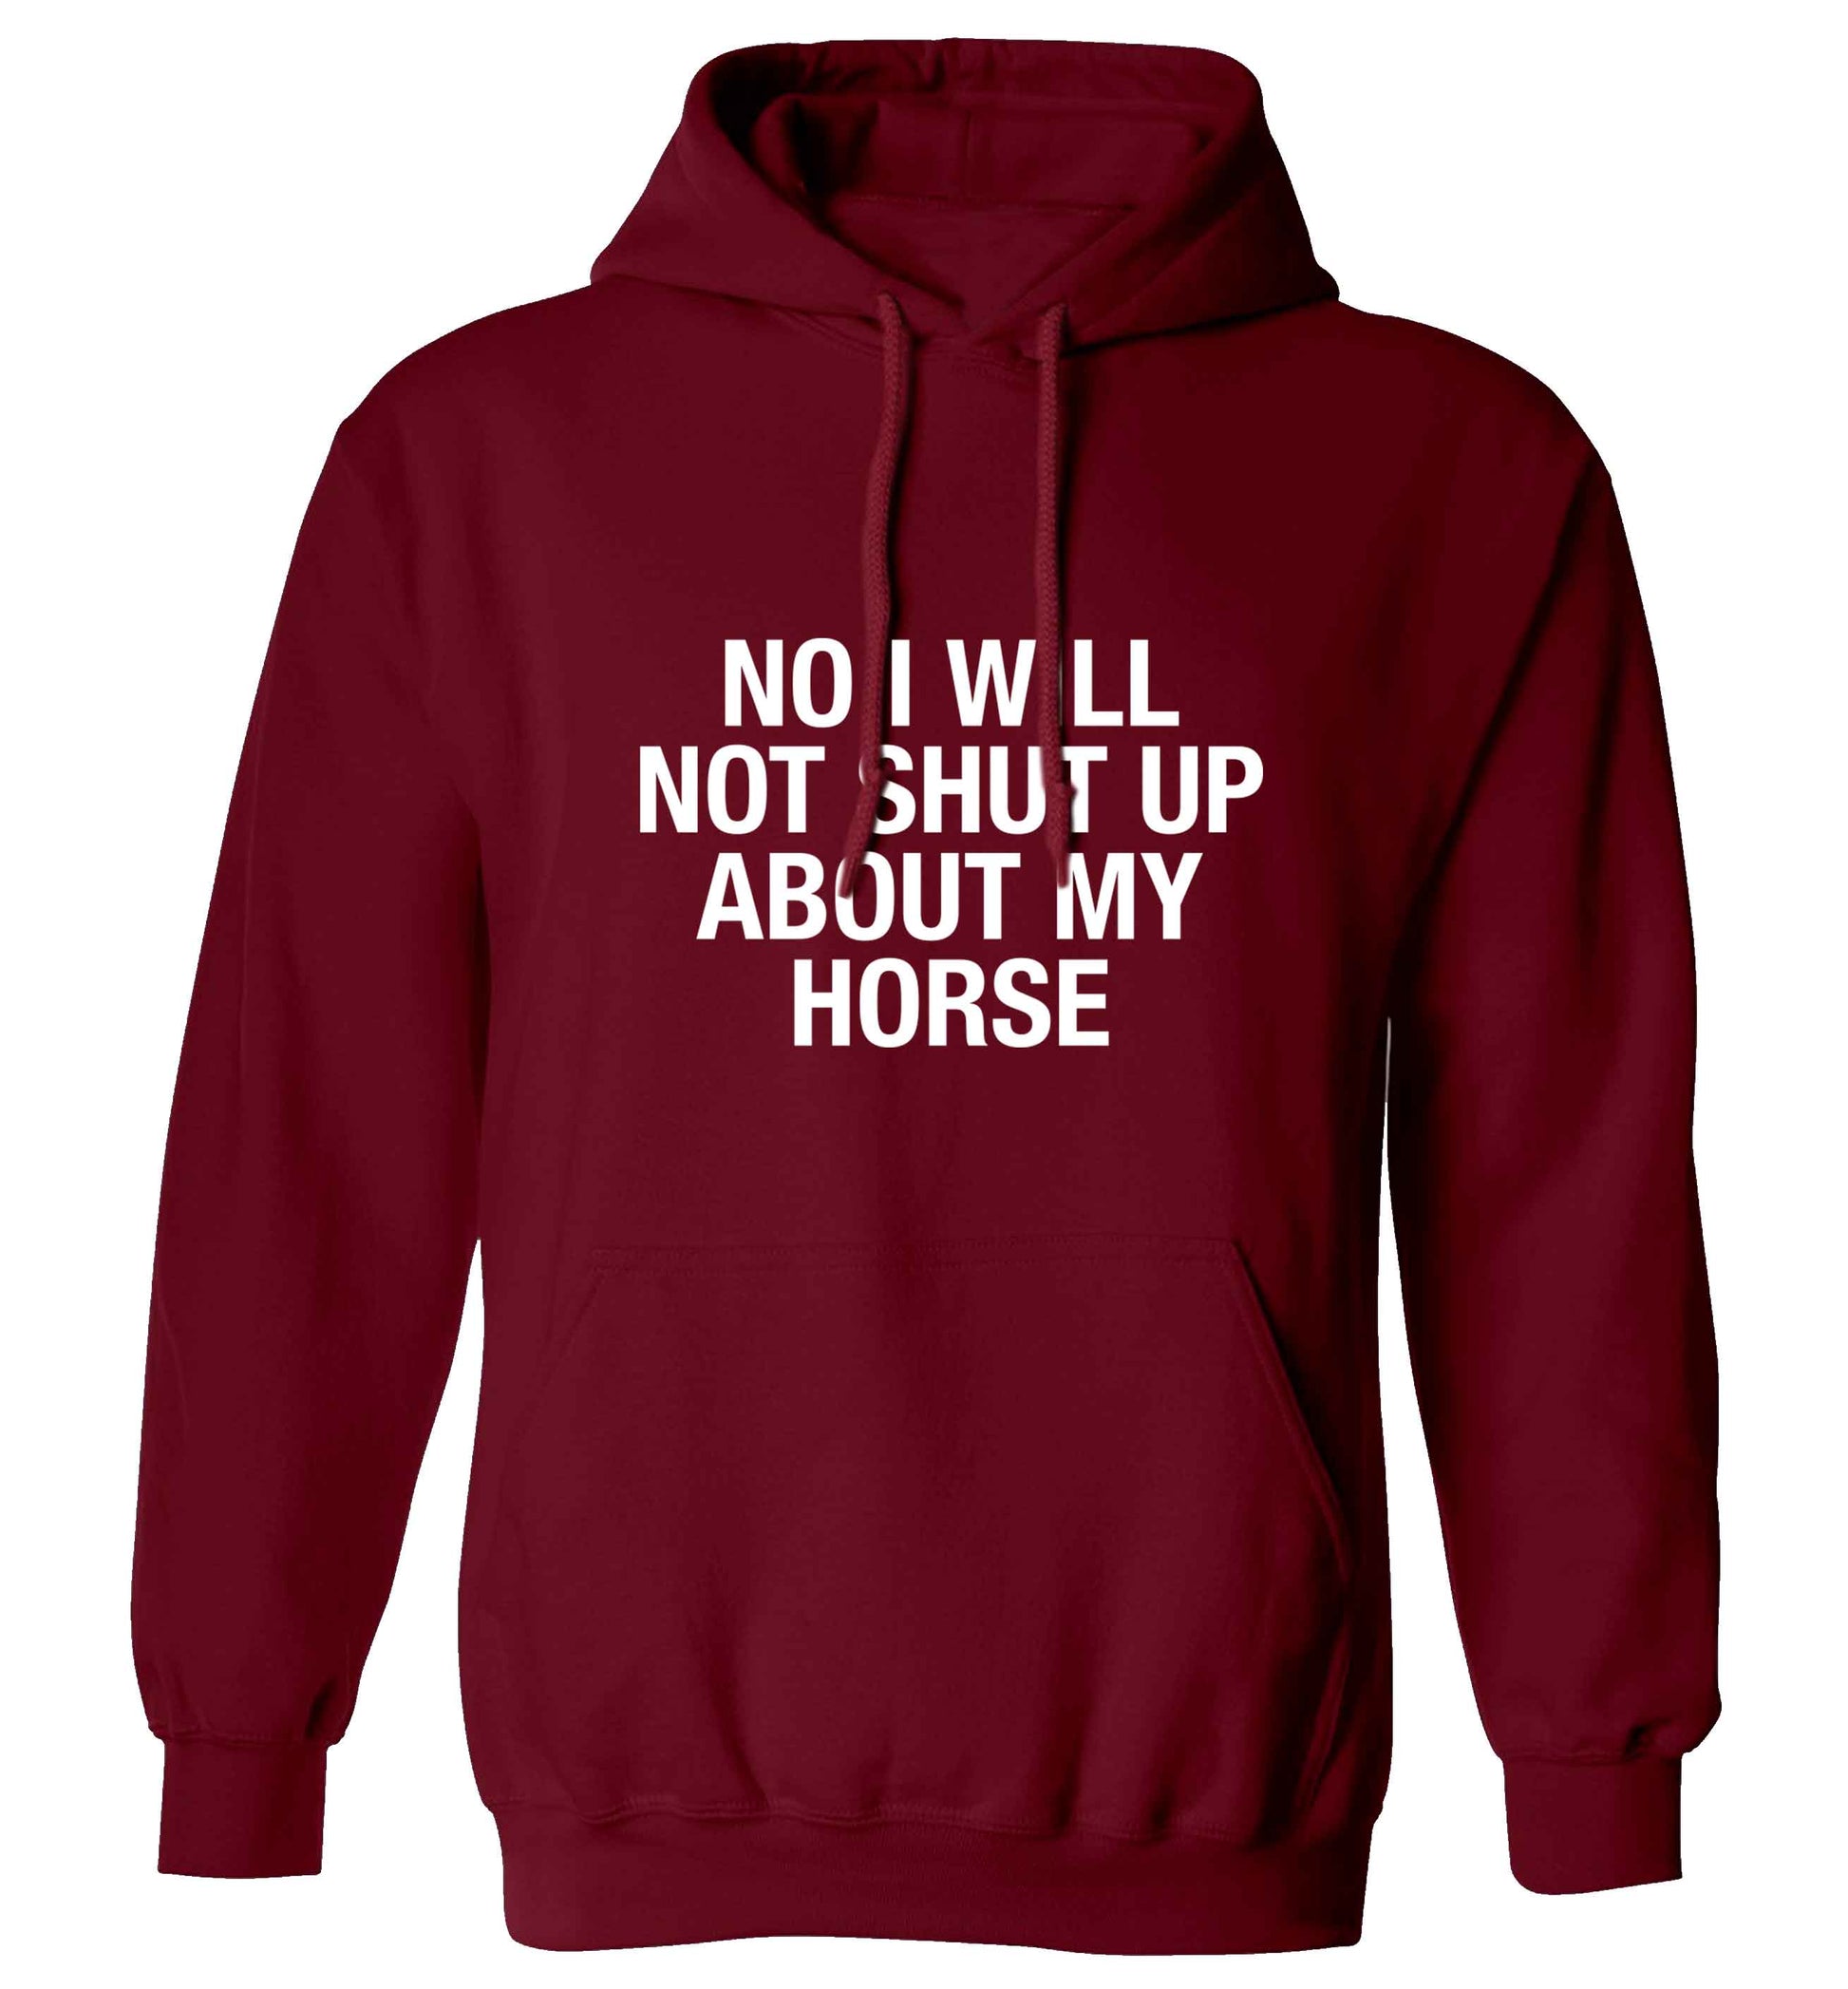 No I will not shut up talking about my horse adults unisex maroon hoodie 2XL